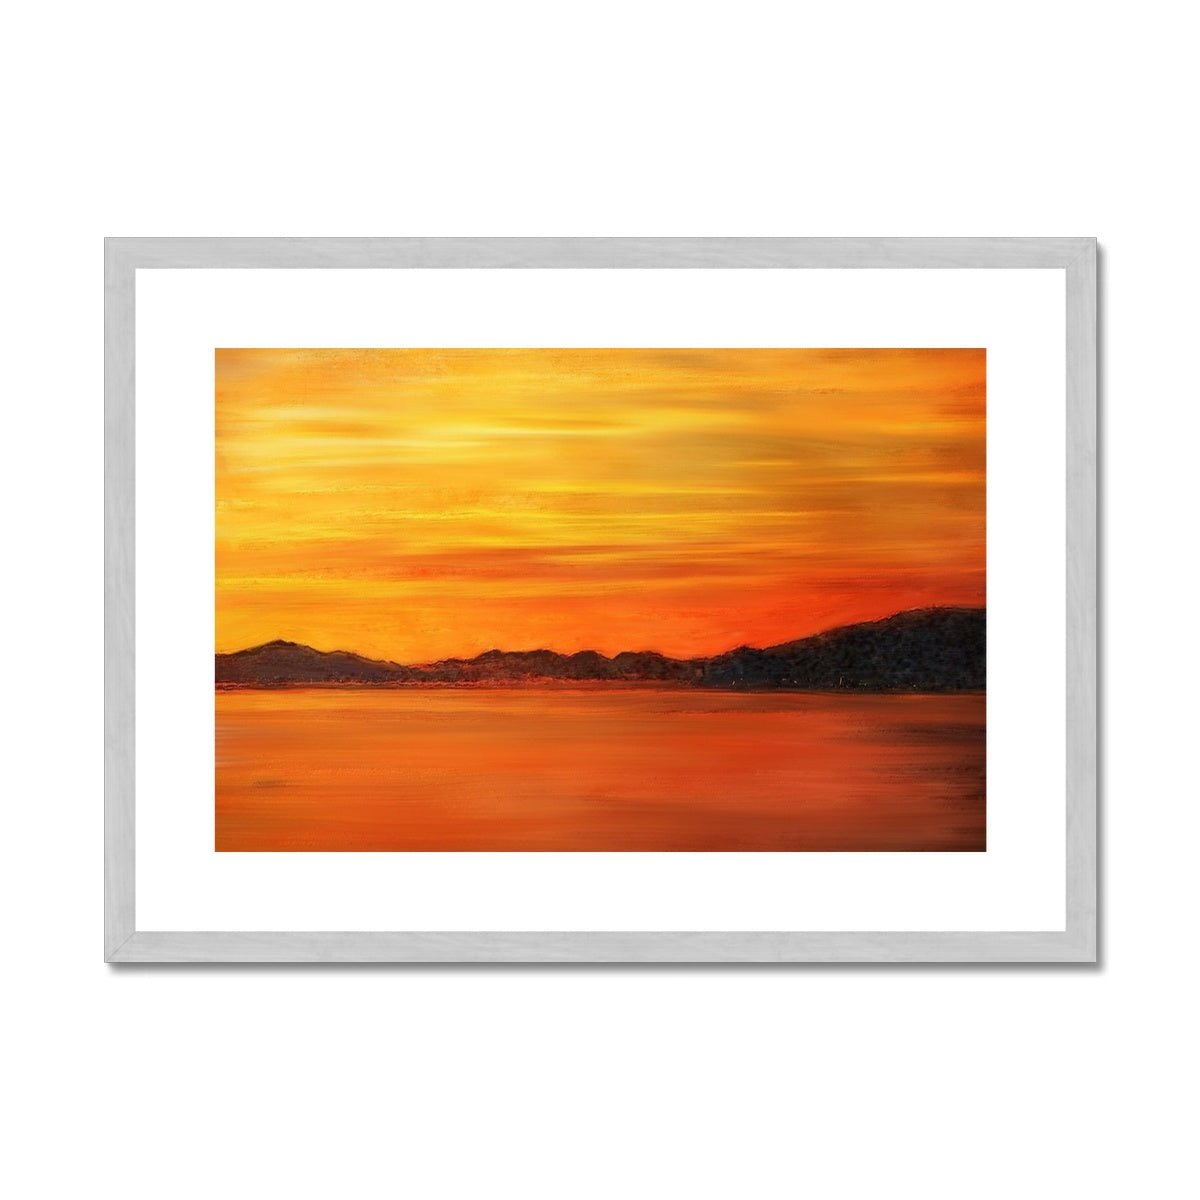 Loch Fyne Sunset Painting | Antique Framed & Mounted Prints From Scotland-Antique Framed & Mounted Prints-Scottish Lochs & Mountains Art Gallery-A2 Landscape-Silver Frame-Paintings, Prints, Homeware, Art Gifts From Scotland By Scottish Artist Kevin Hunter